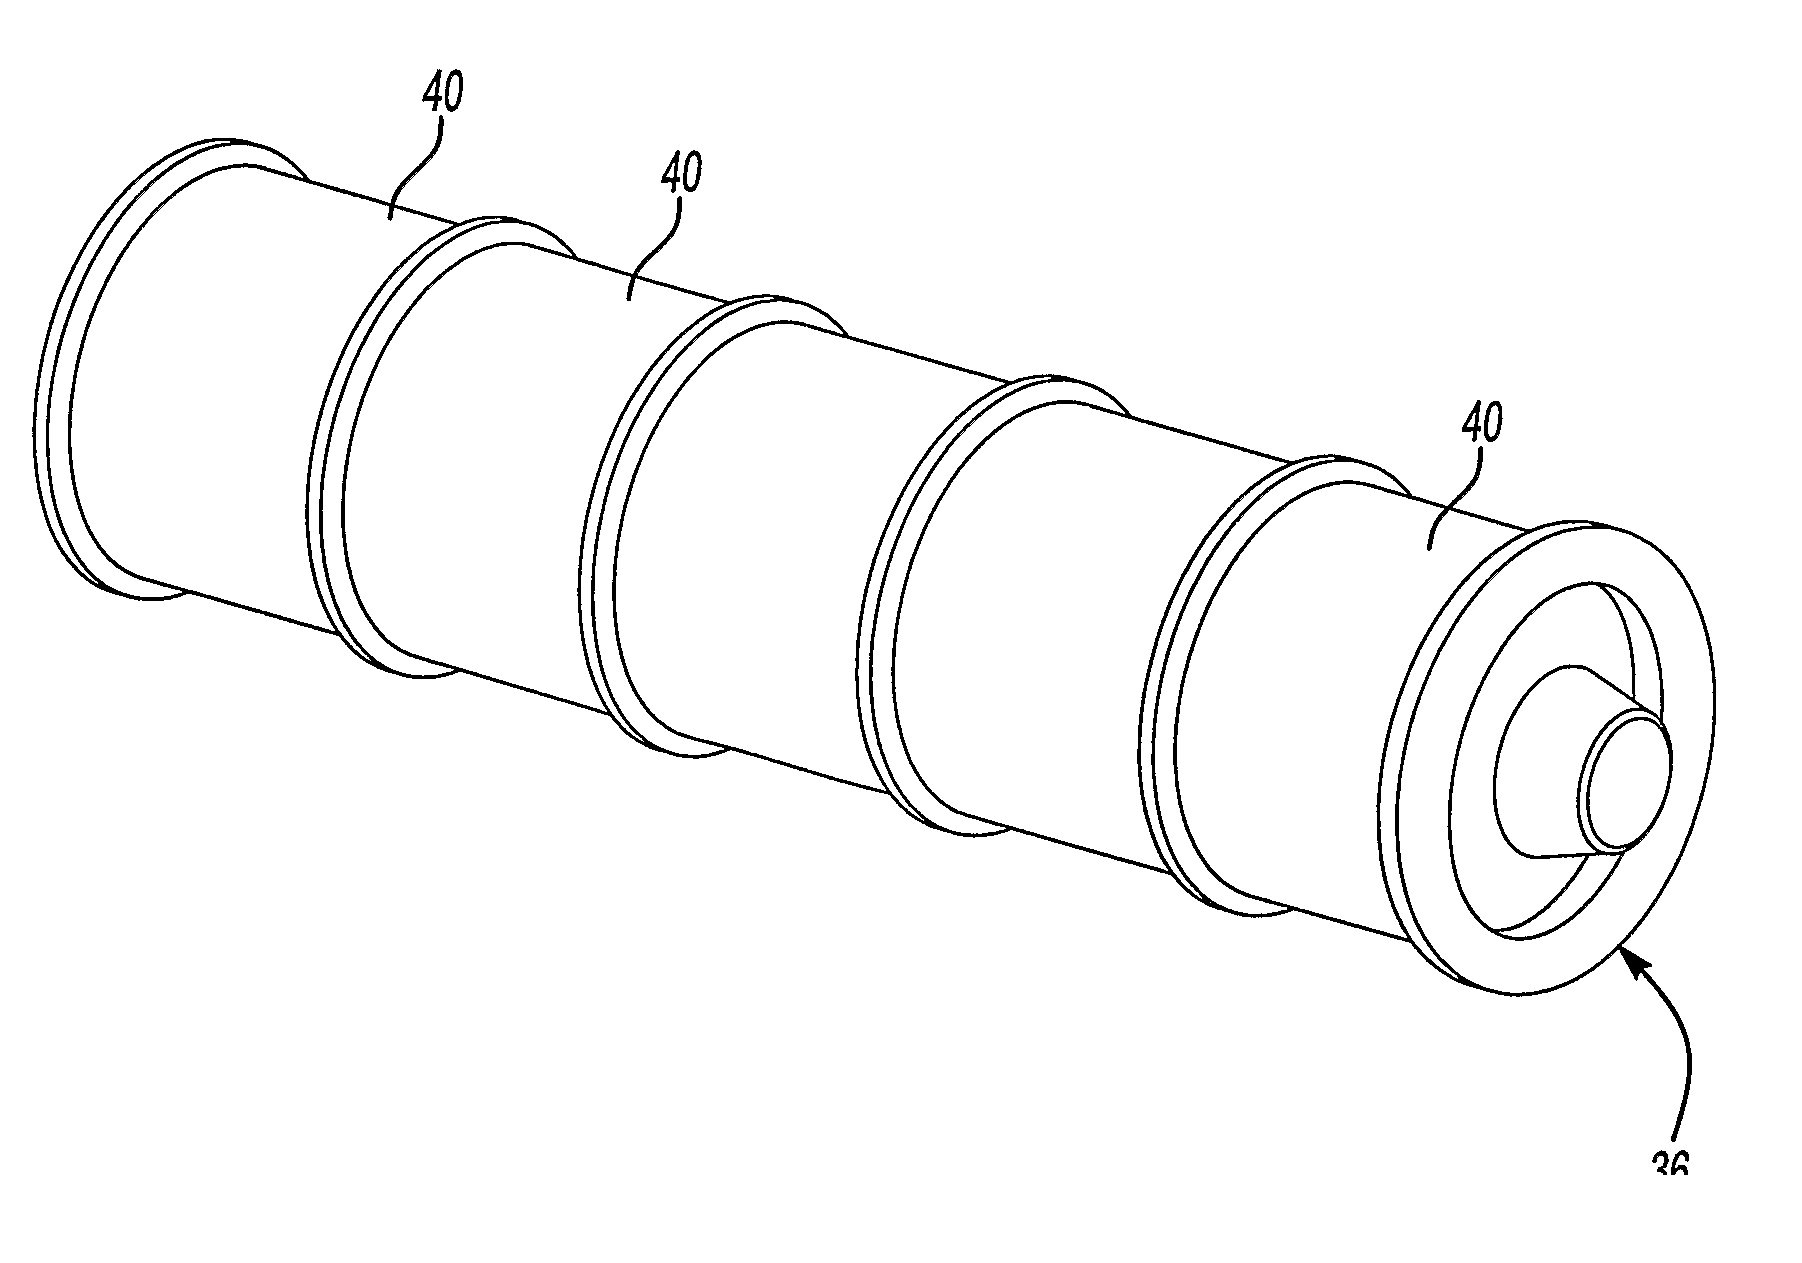 Sheave for Use in an Elevator System